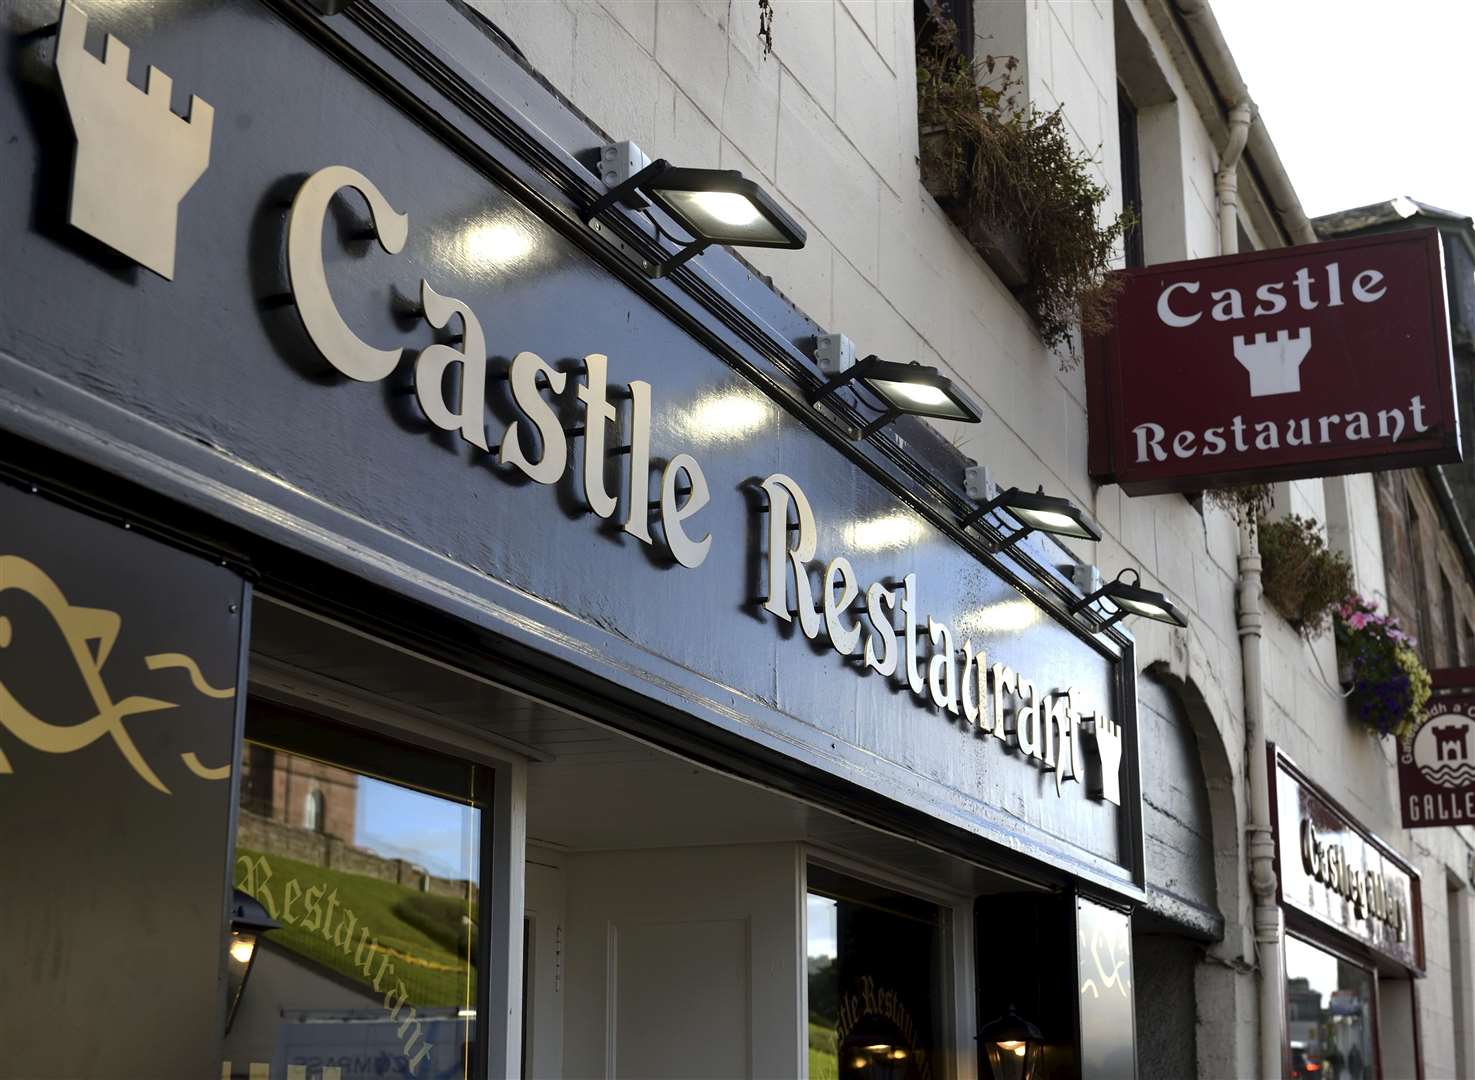 The Castle Restaurant was seemingly saved from closure when the new owners took over last year.